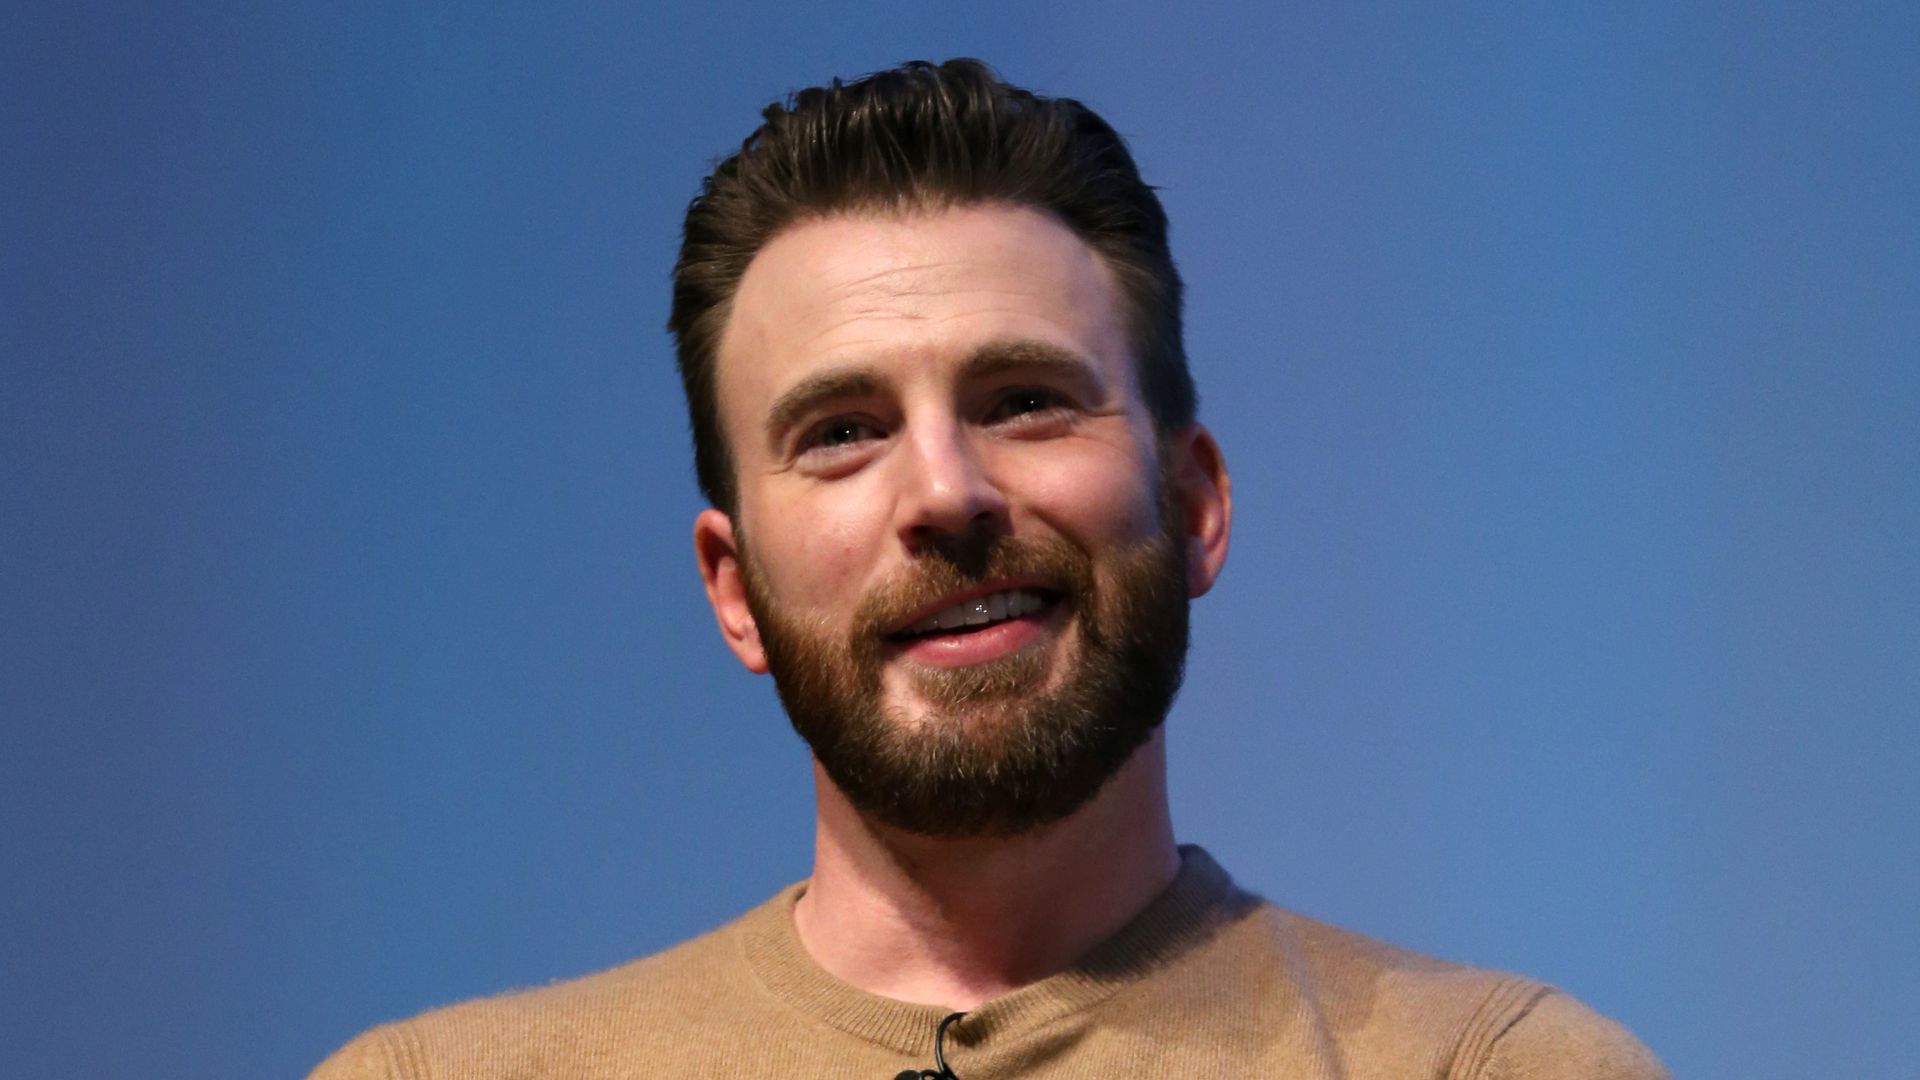 Chris Evans speaks onstage at the WIRED25 Summit 2019 - Day 2 at Commonwealth Club on November 09, 2019 in San Francisco, California